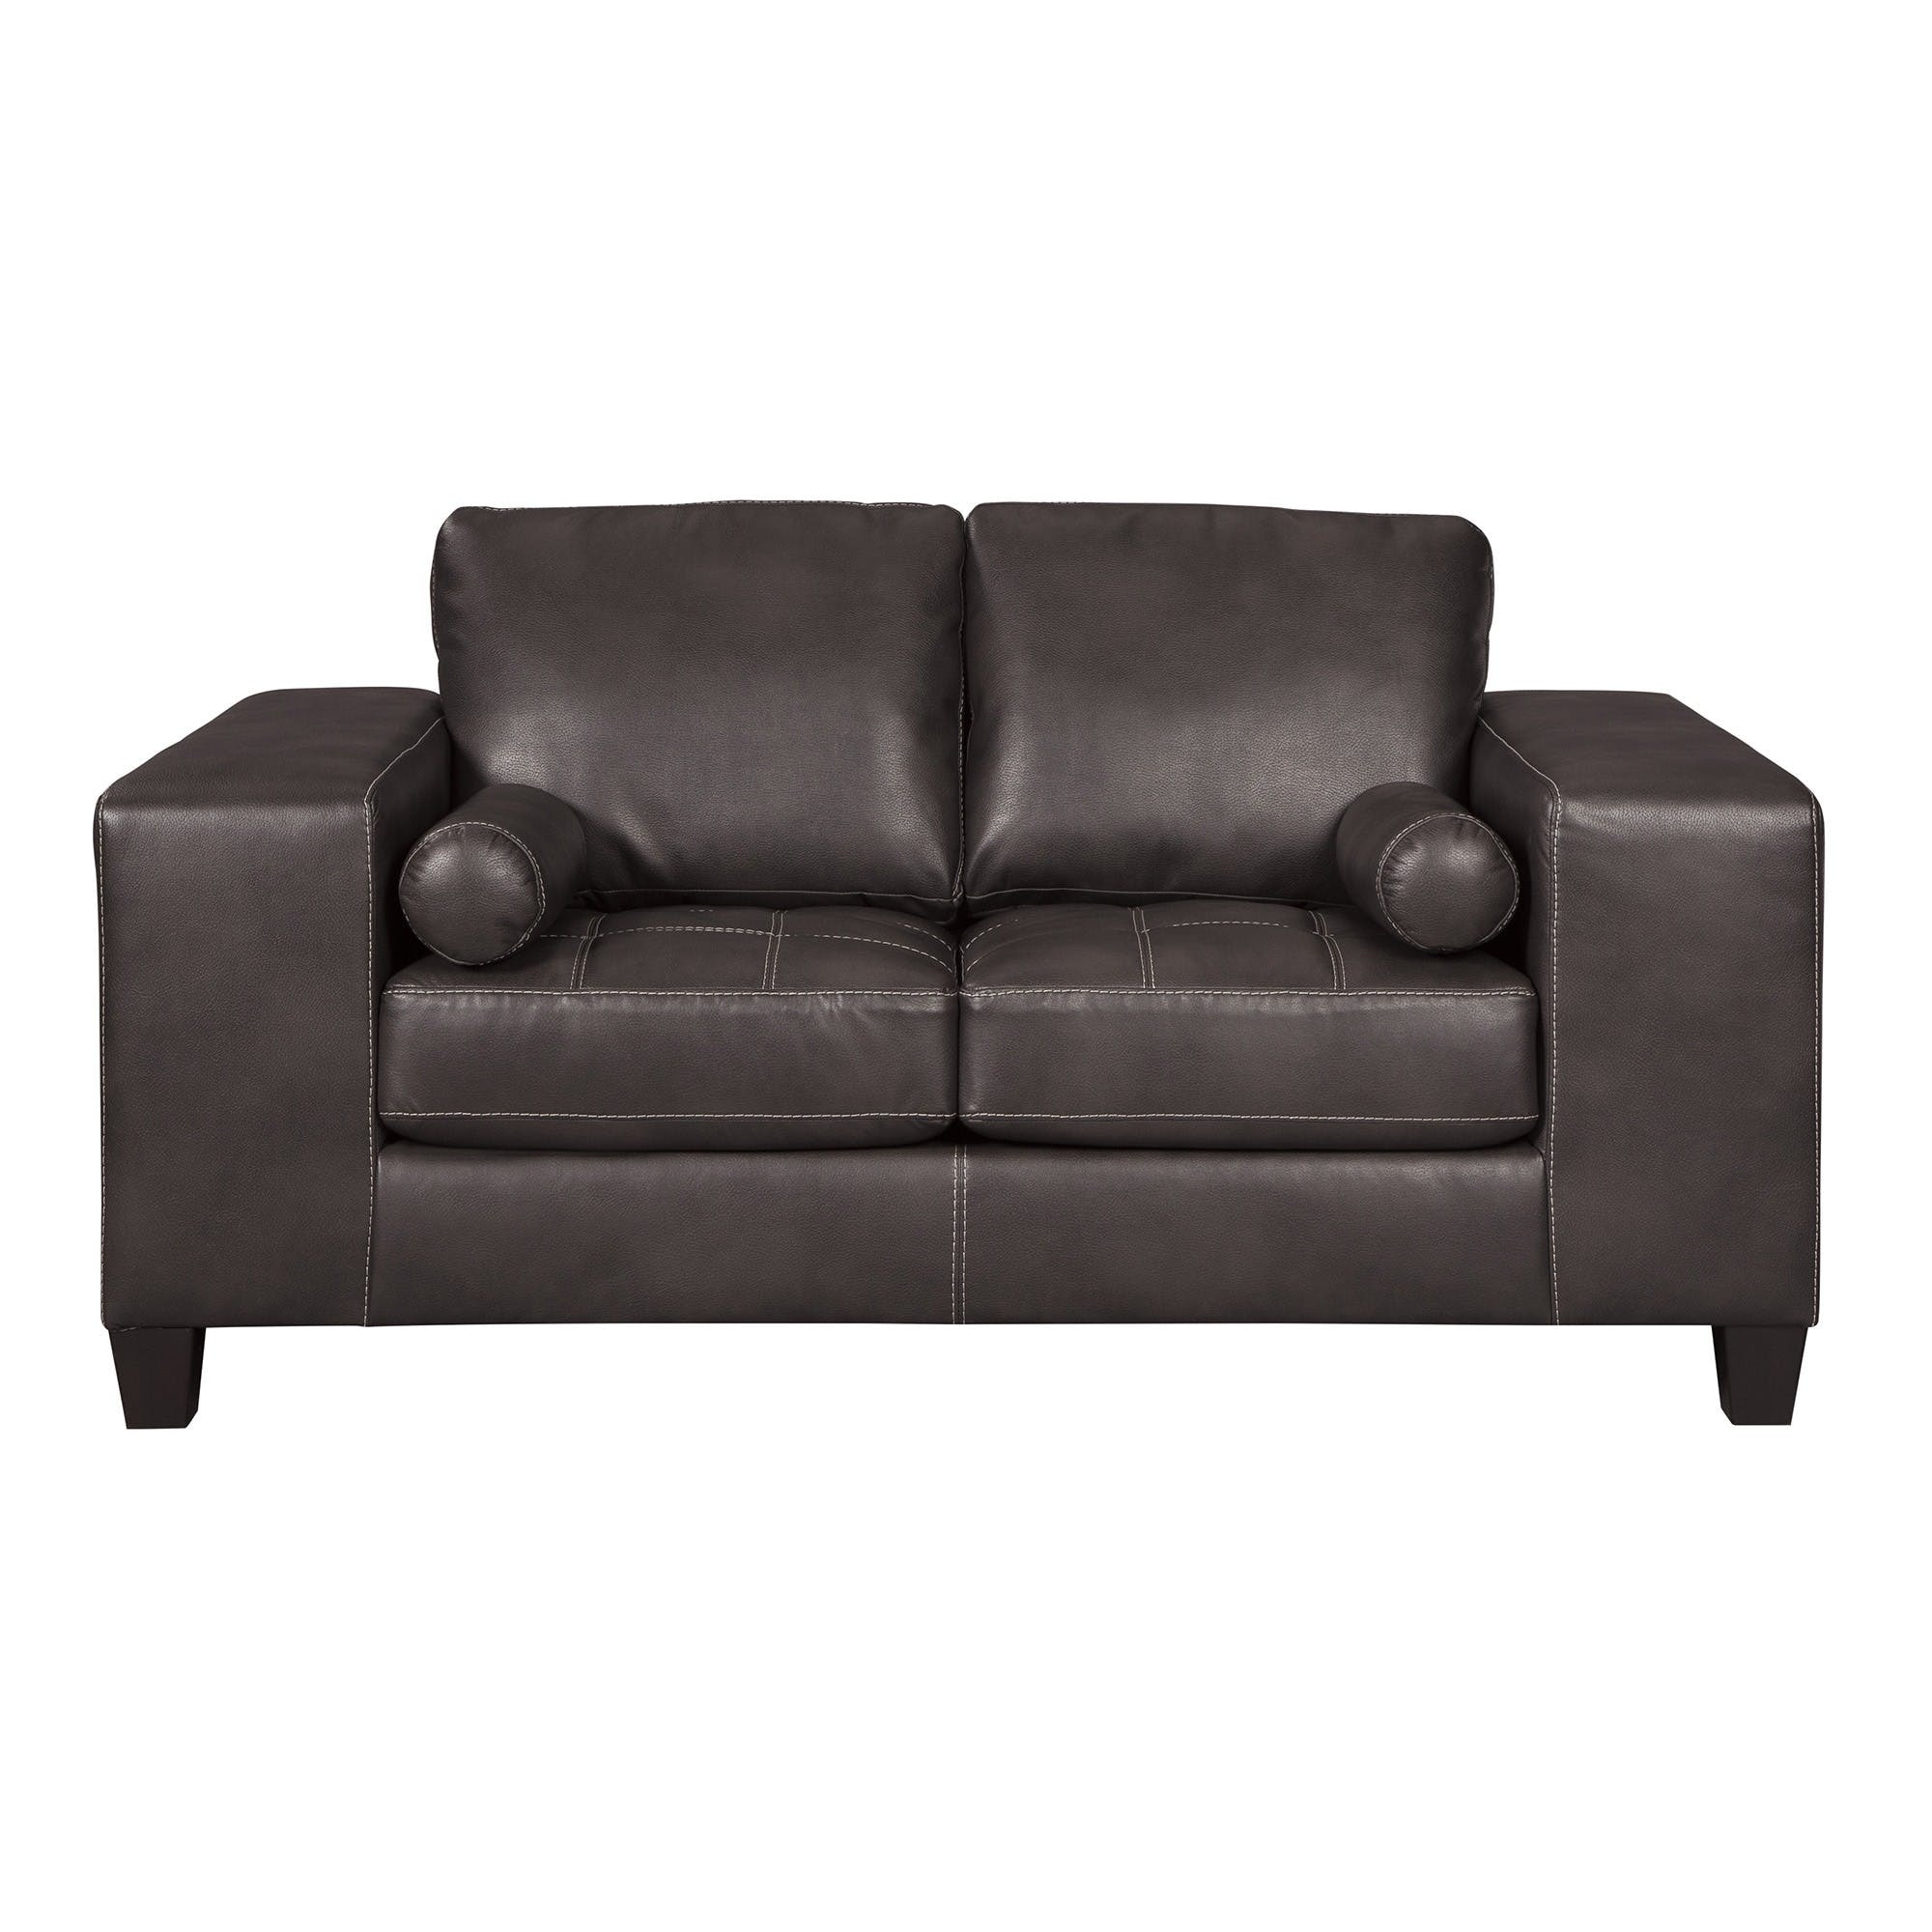 Ideas, Low Back Loveseat Set : Pictures